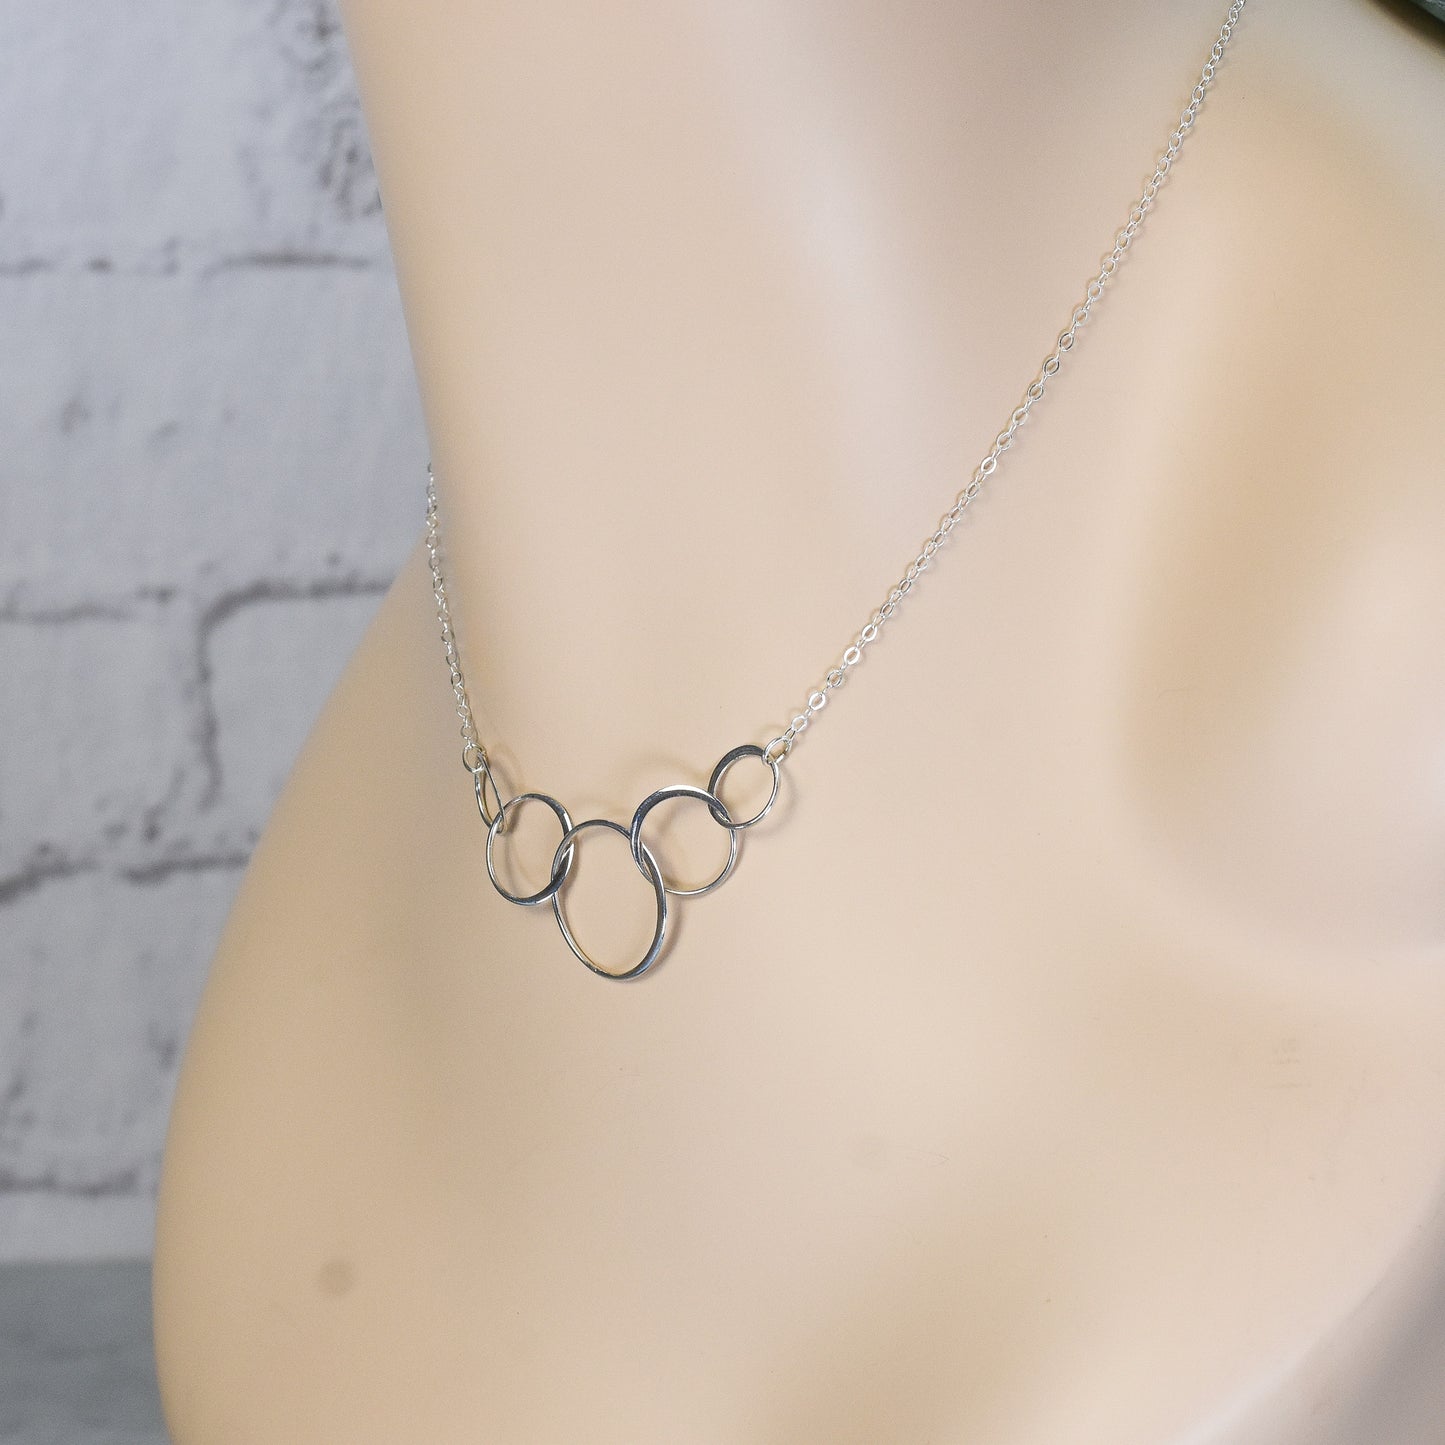 5 Circles of Life Necklace